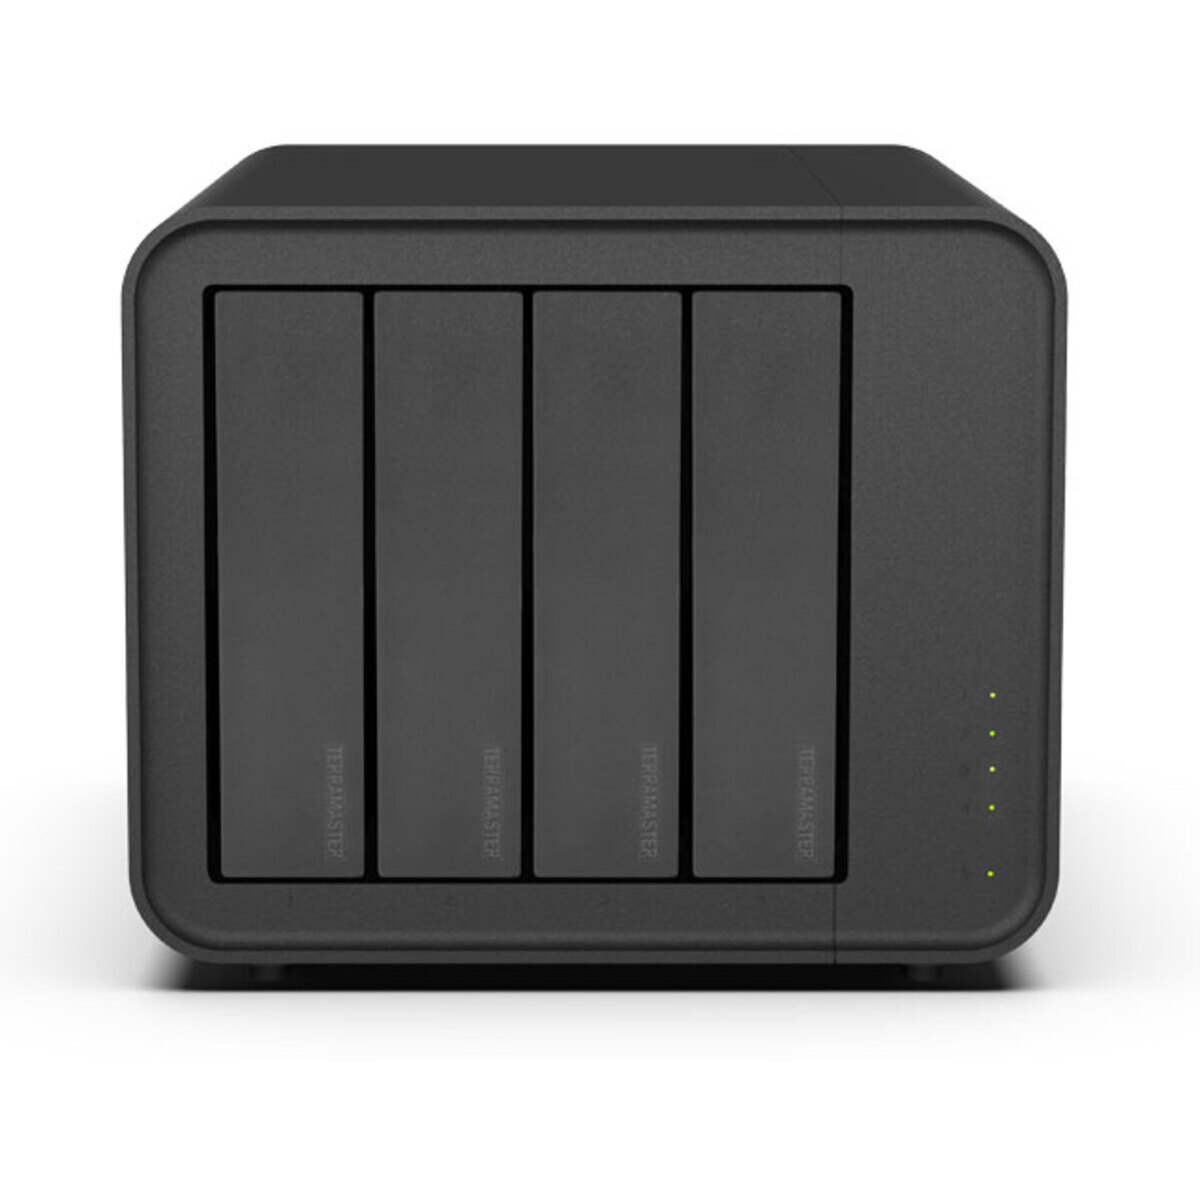 TerraMaster F4-212 6tb 4-Bay Desktop Personal / Basic Home / Small Office NAS - Network Attached Storage Device 3x2tb Sandisk Ultra 3D SDSSDH3-2T00 2.5 560/520MB/s SATA 6Gb/s SSD CONSUMER Class Drives Installed - Burn-In Tested F4-212